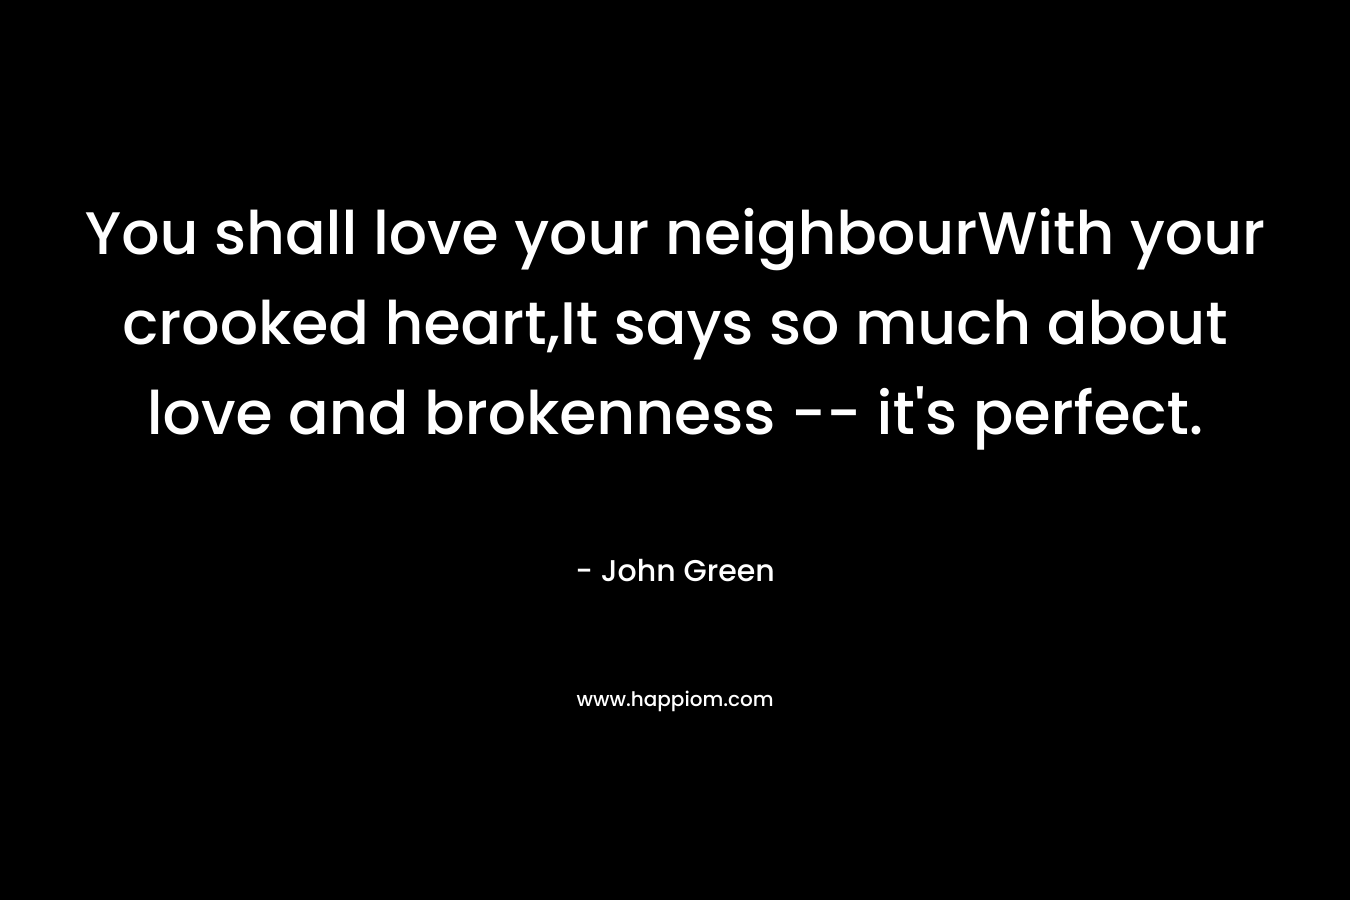 You shall love your neighbourWith your crooked heart,It says so much about love and brokenness -- it's perfect.